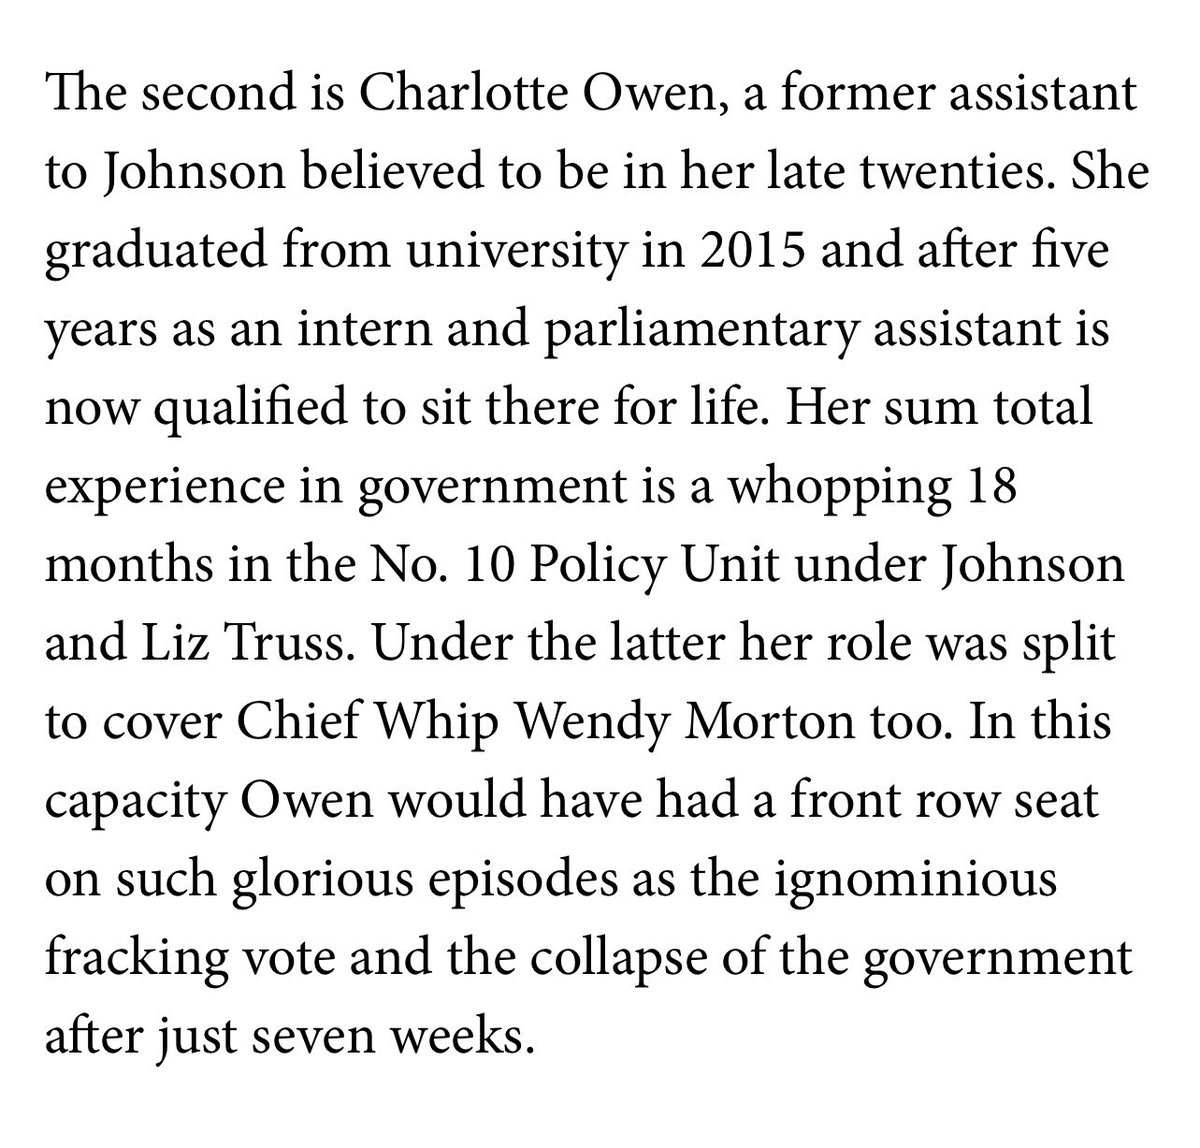 Johnson Honours List Number 2 Charlotte Owen, age 29, spent 18 months in a minor role as an 'assistant' to Johnson and others at Number 10. She's put into the House of Lords by Johnson. There is literally no reason why. Johnson mocking the public again? Hmmmmm